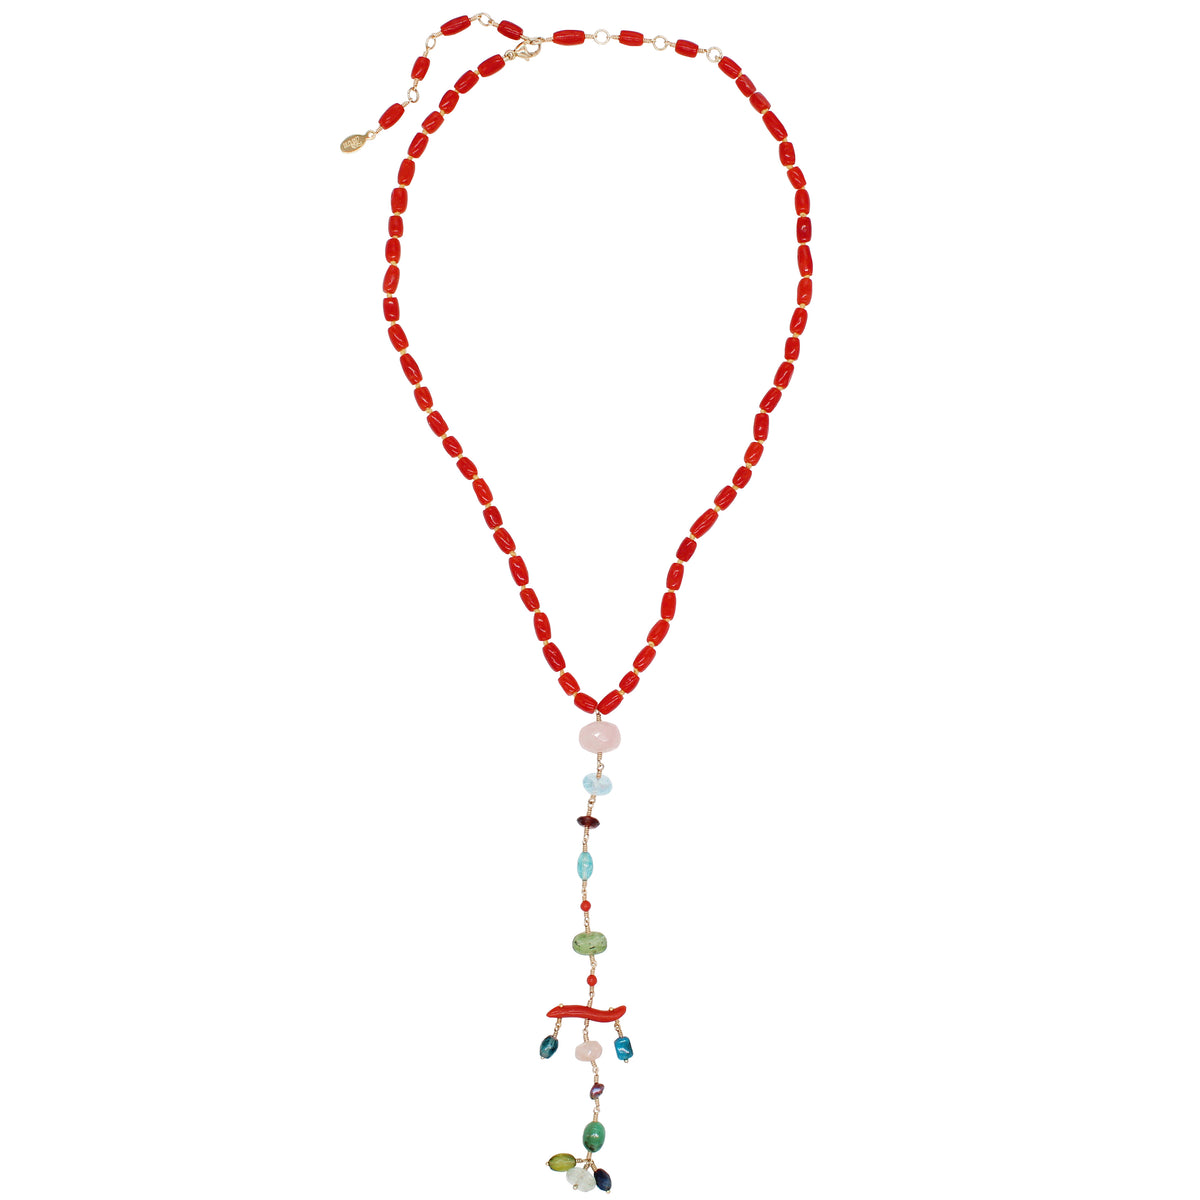 Coral Lariat Necklace with a Gemstone Drop in  Various Stones. 